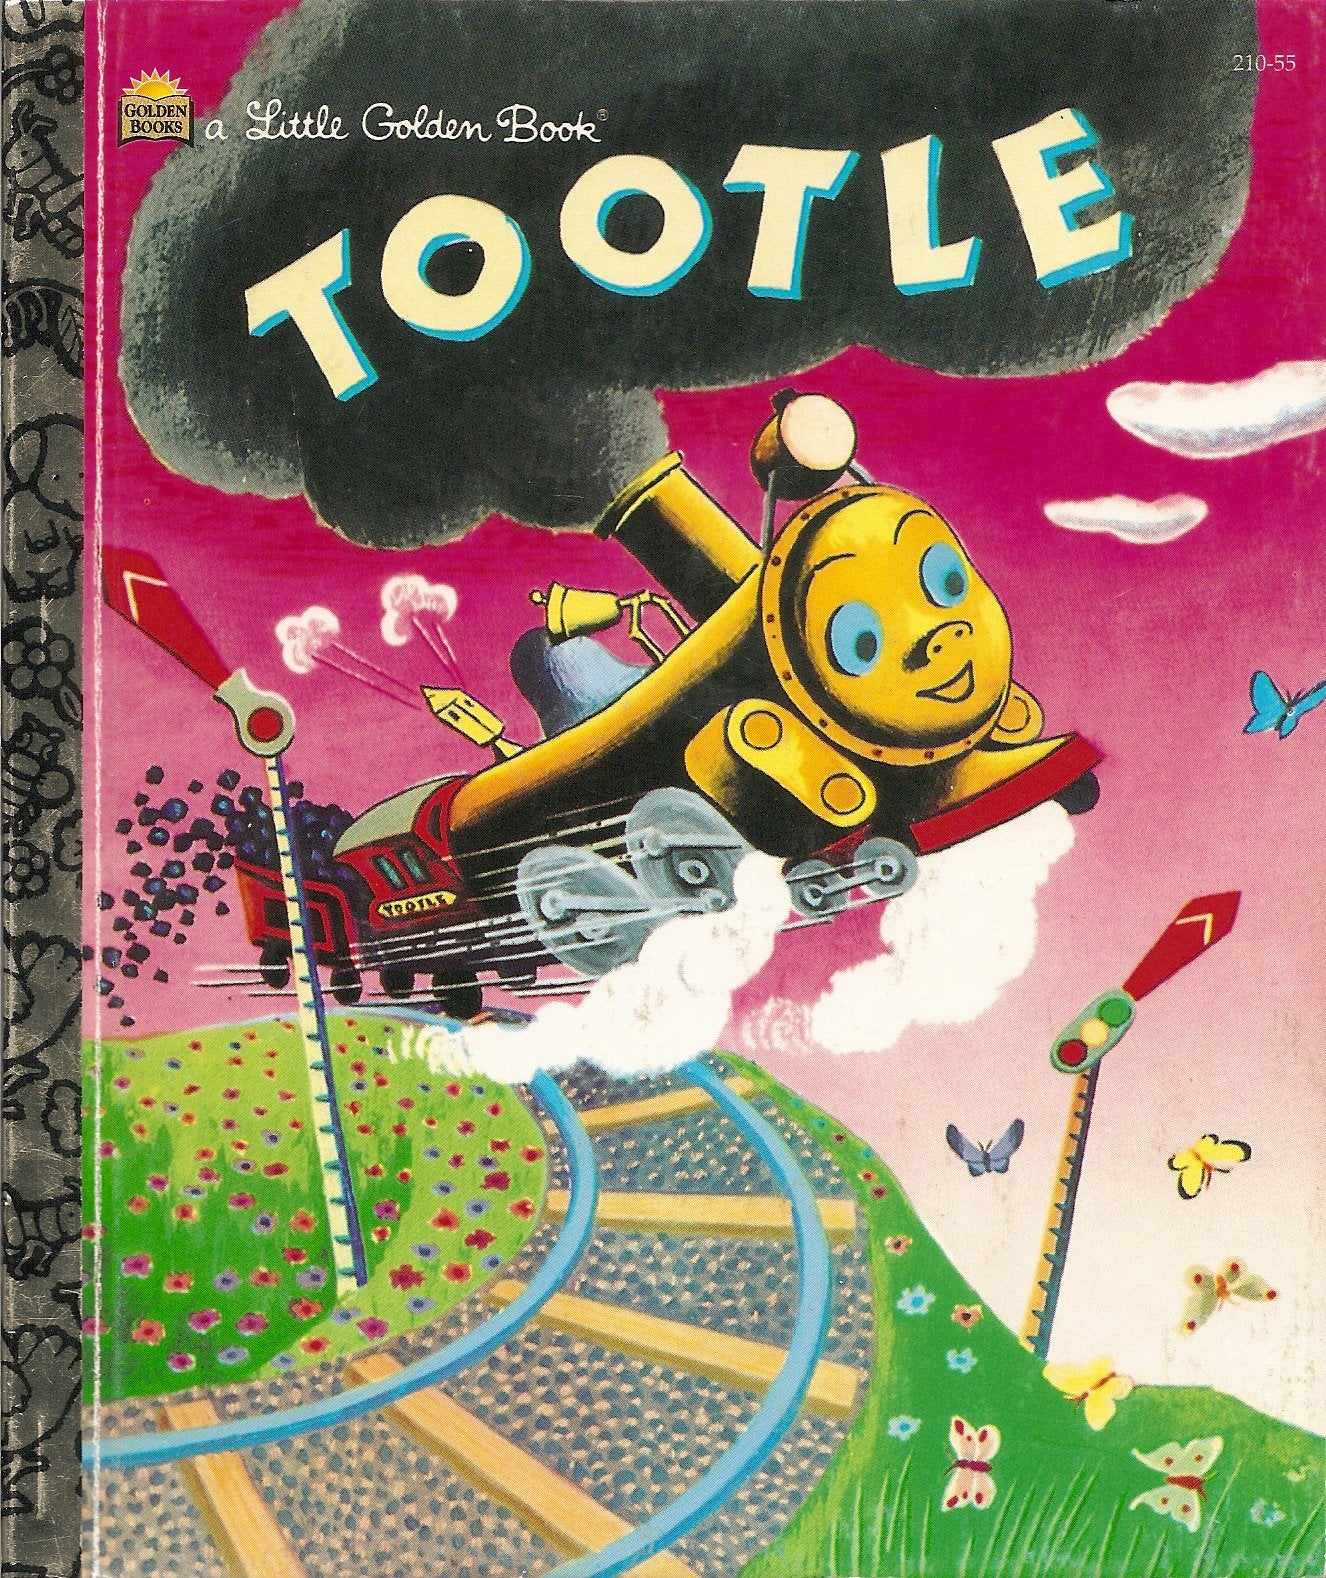 TOOTLE